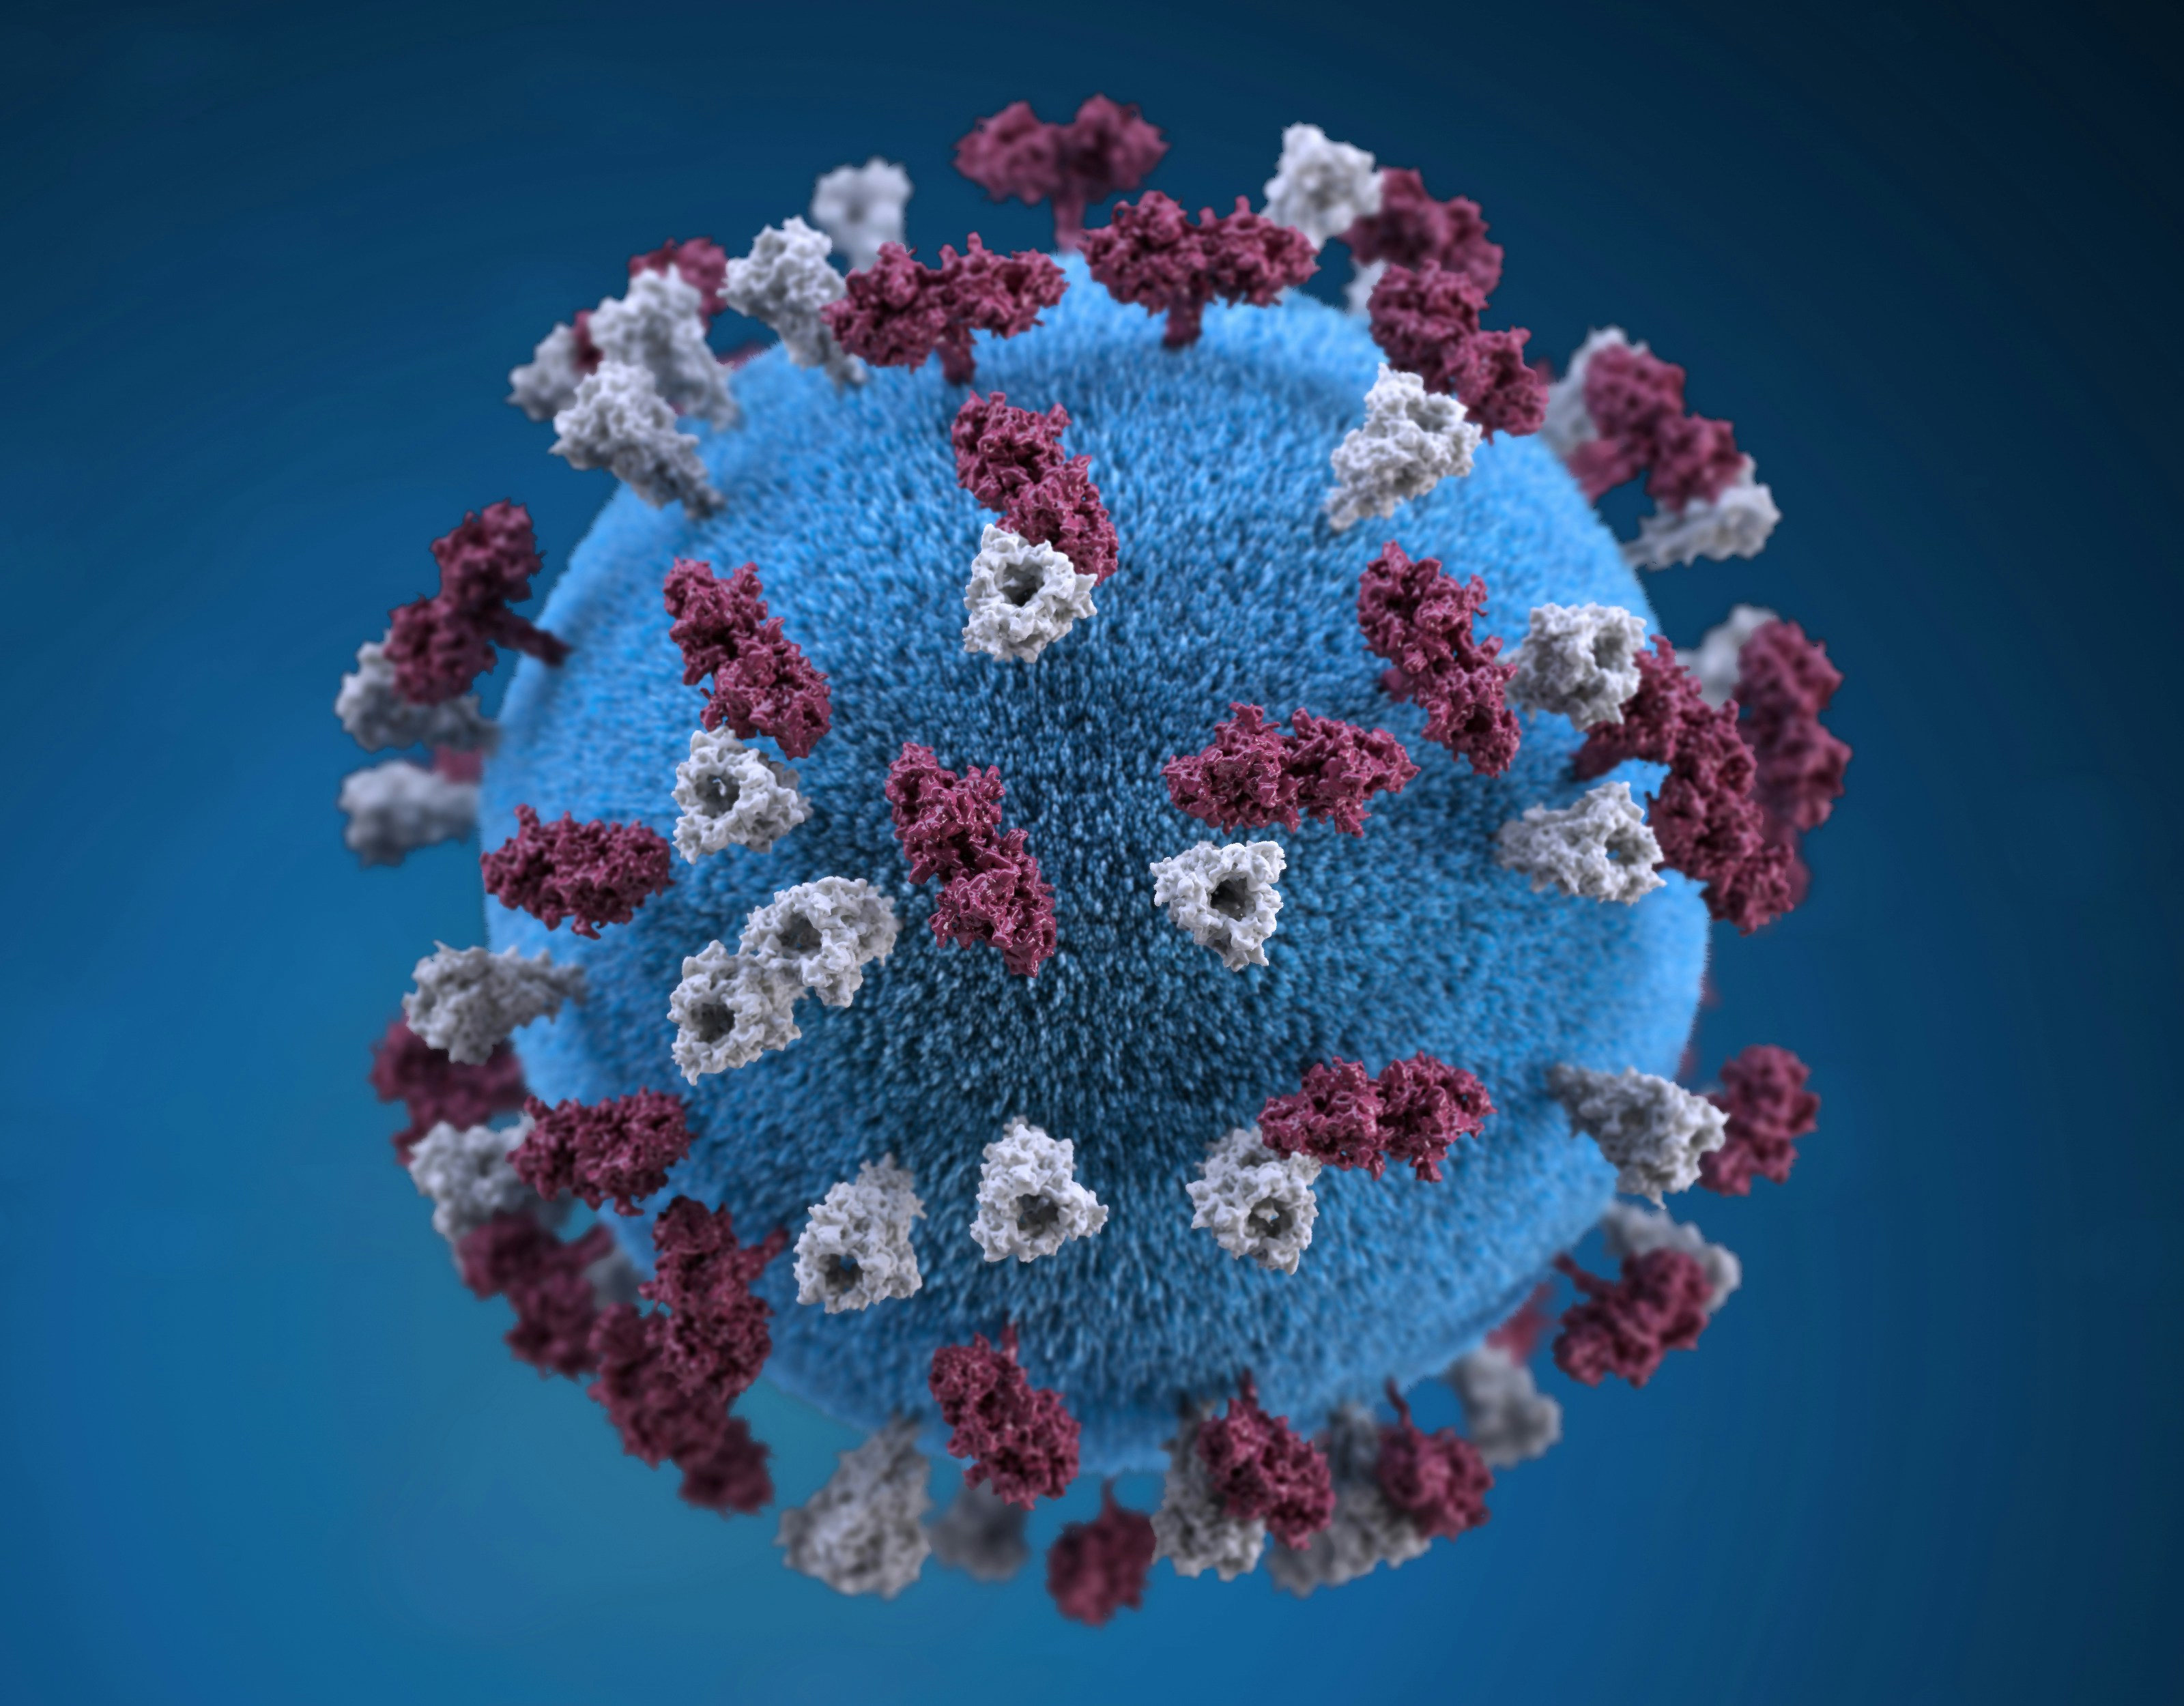 This illustration provided a 3D graphic representation of a spherical-shaped, measles virus particle, that was studded with glycoprotein tubercles. Those tubercular studs colorized maroon, are known as H-proteins (hemagglutinin), while those colorized gray, represented what are referred to as F-proteins (fusion). The F-protein is responsible for fusion of the virus and host cell membranes, viral penetration, and hemolysis. The H-protein is responsible for the binding of virions to cells. Both types of proteinaceous studs are embedded in the particle envelope’s lipid bilayer.